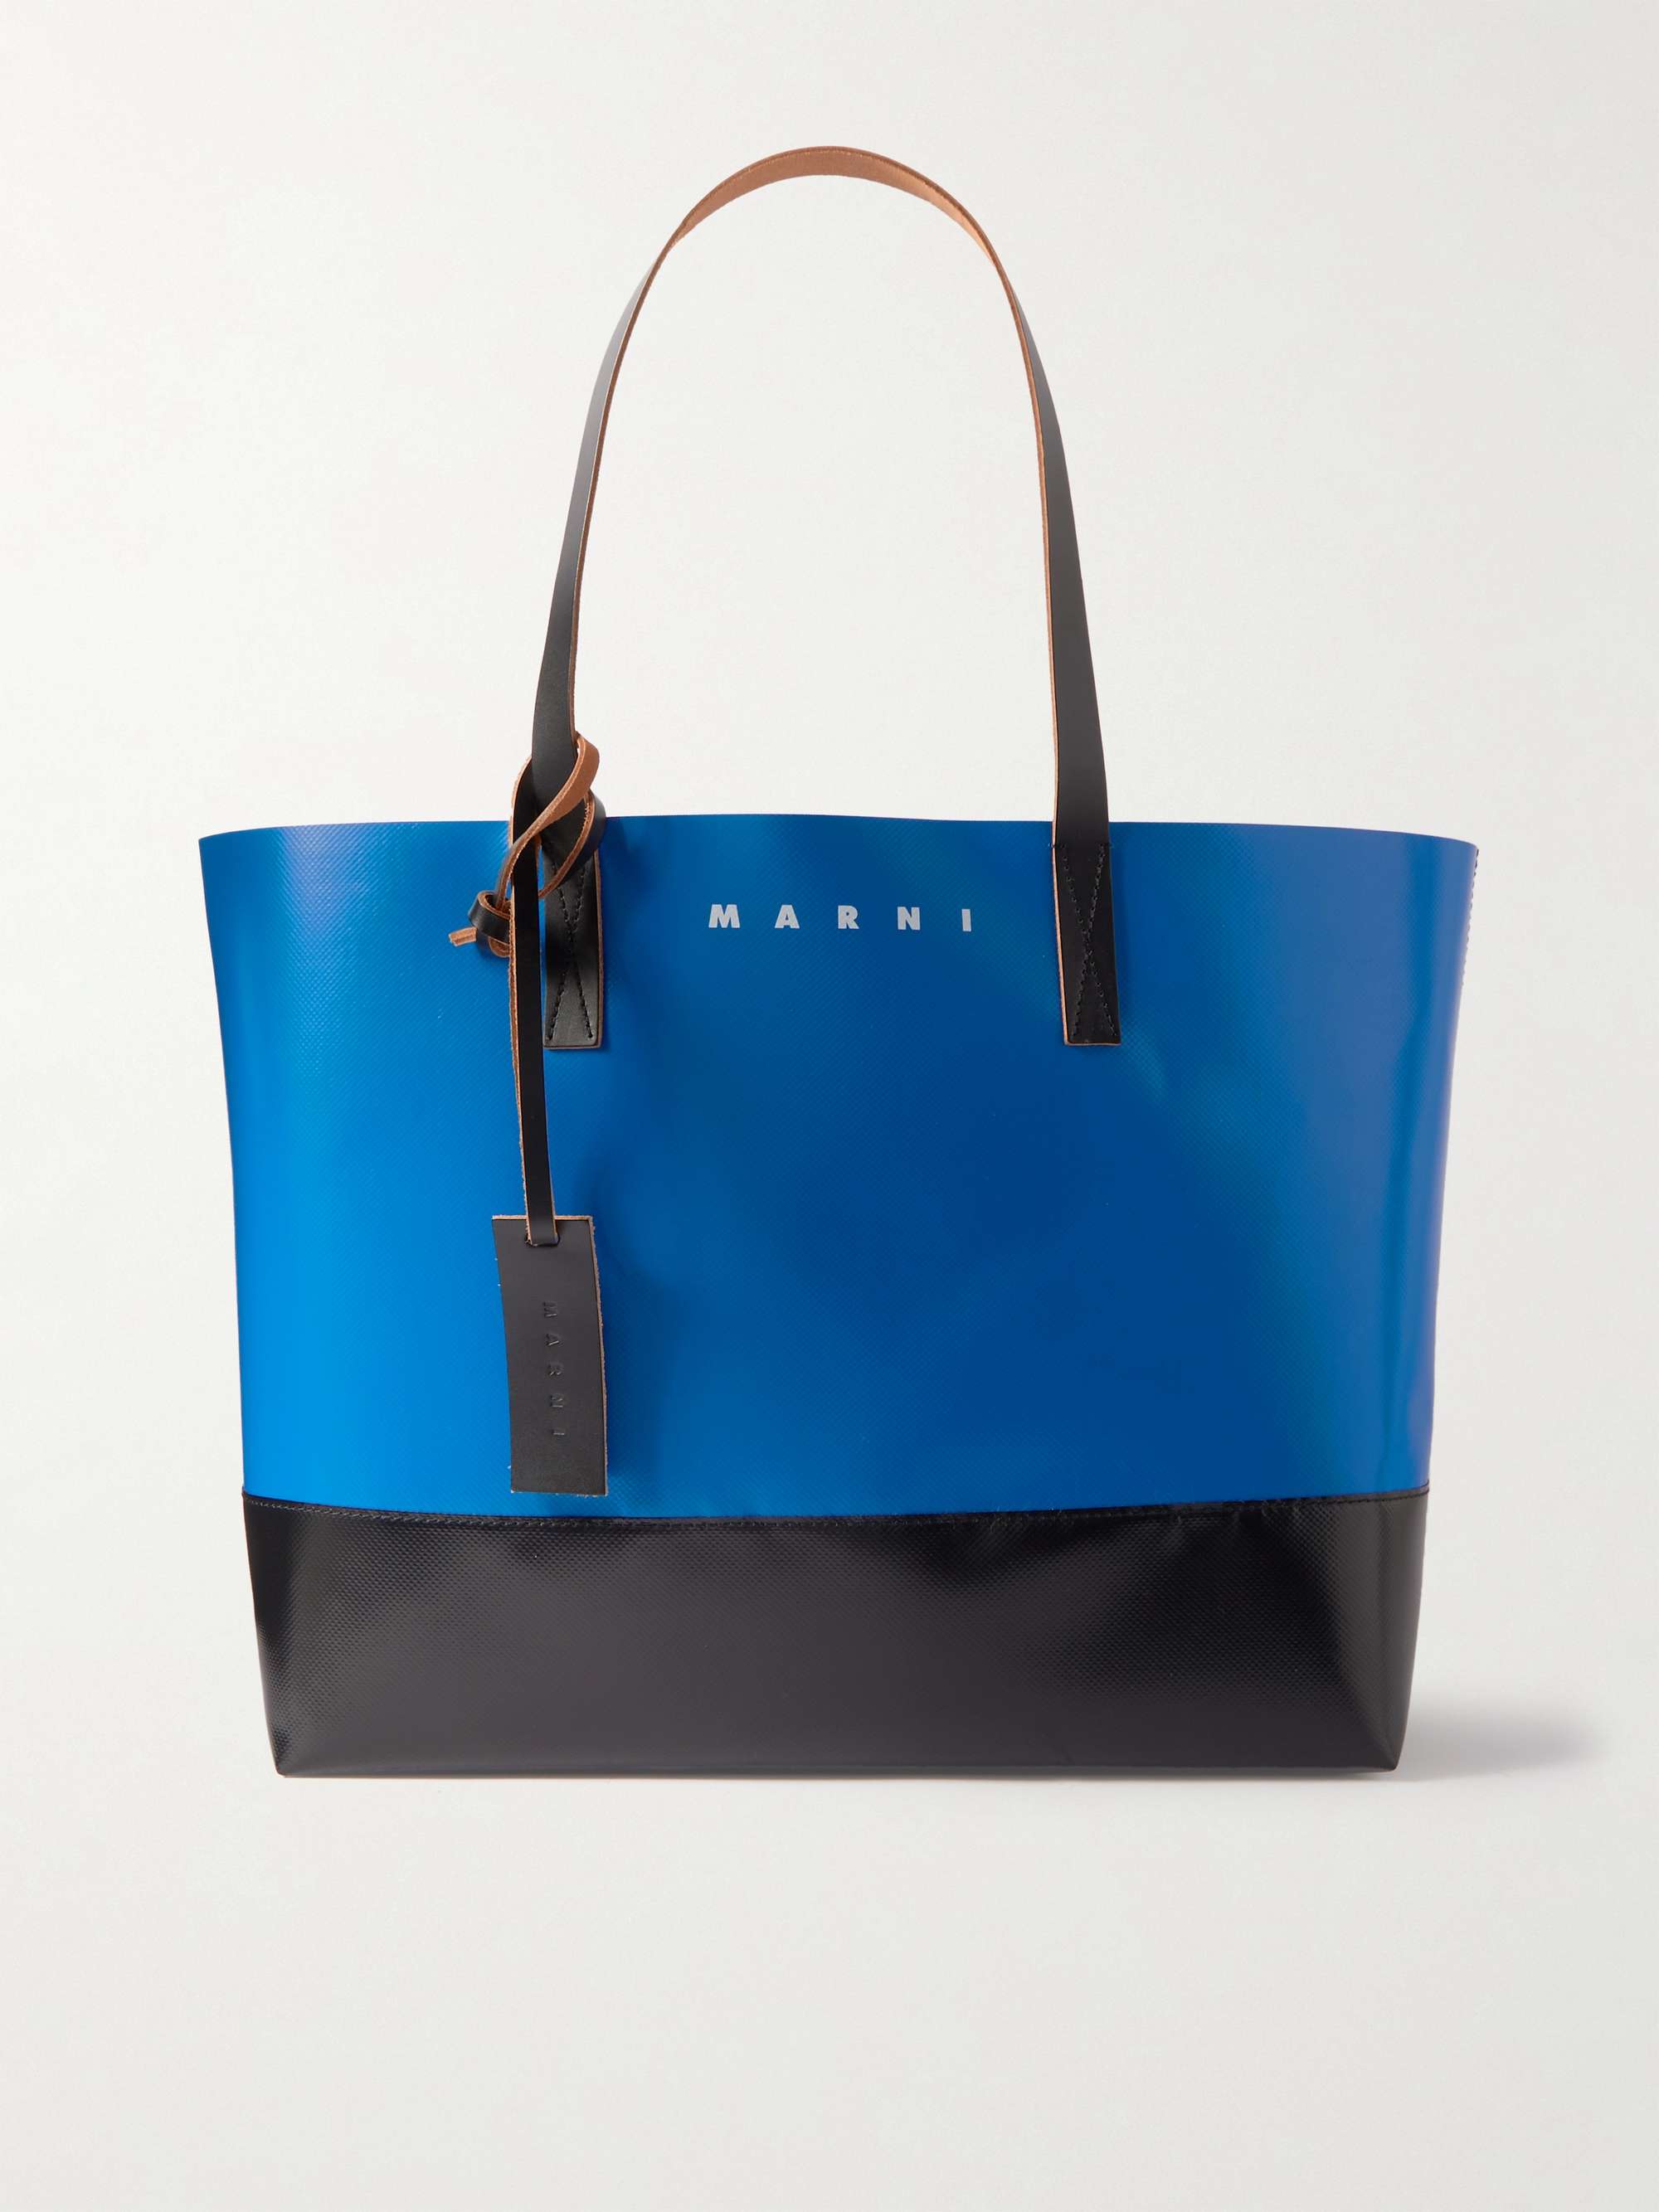 MARNI East/West Colour-Block Leather-Trimmed Shell Tote Bag